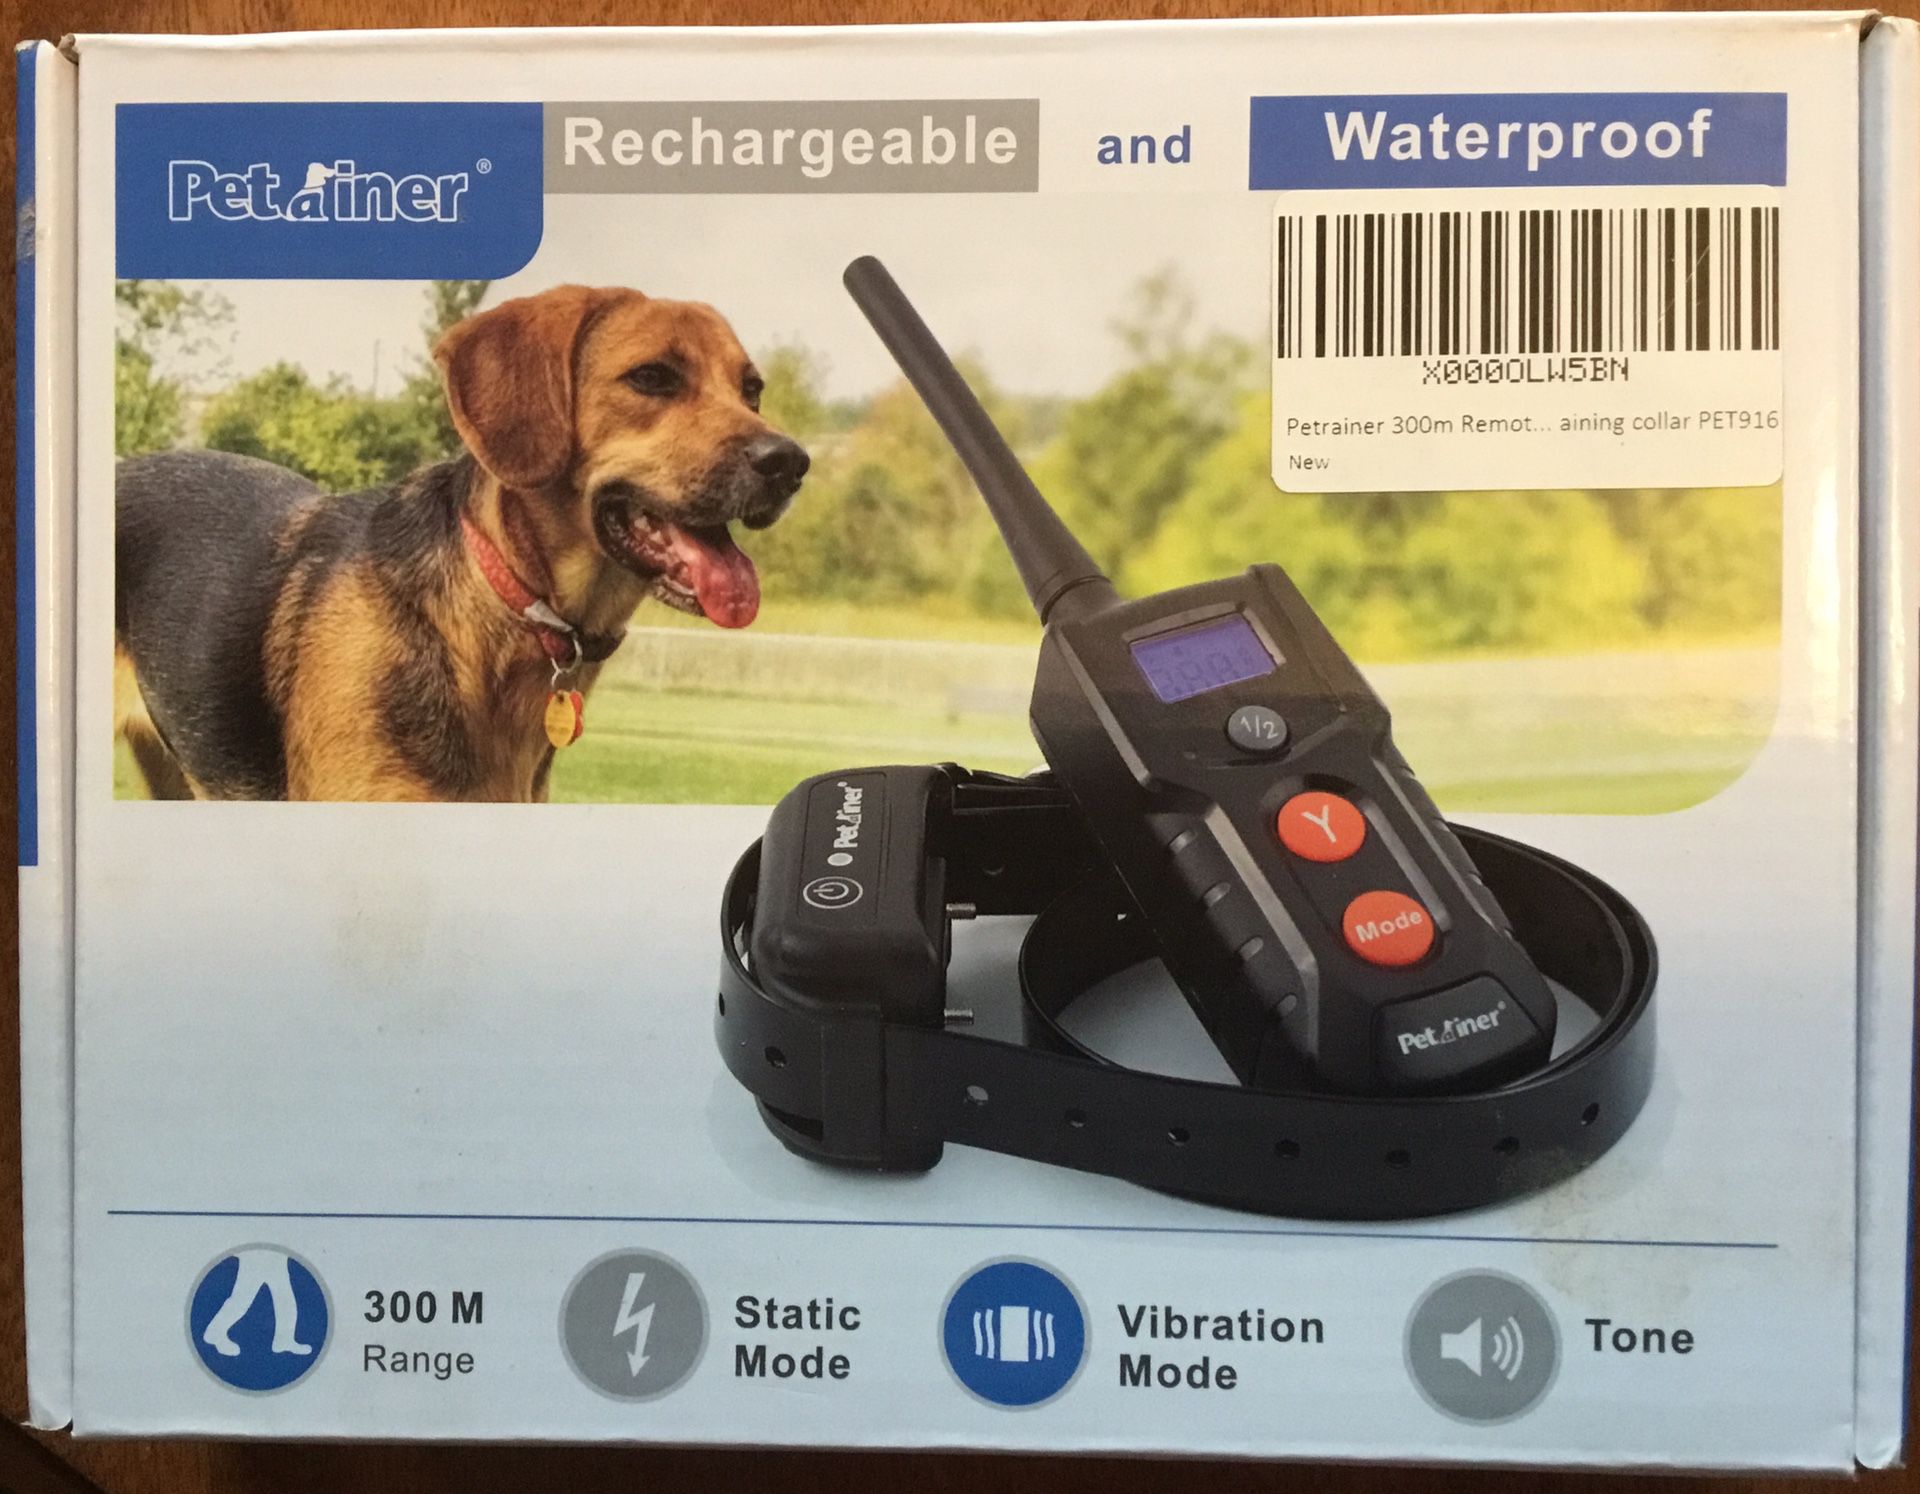 Petainer Rechargeable and Waterproof Training Collar System